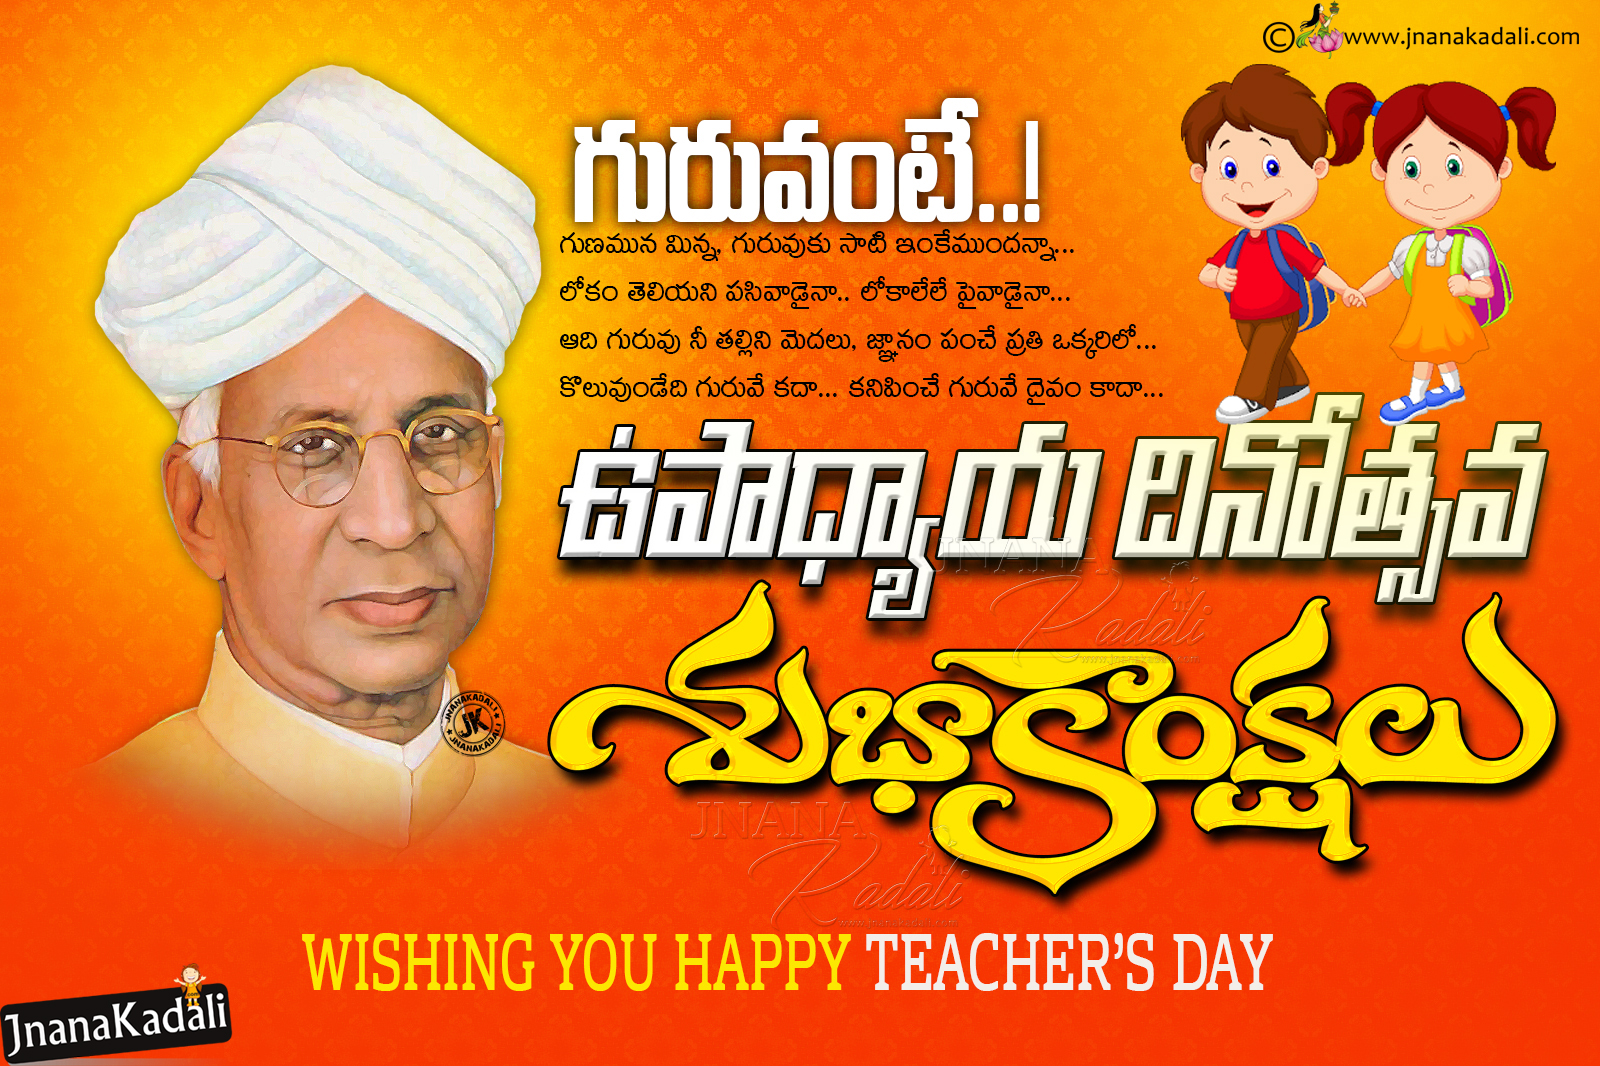 September 5th Happy Teachers Day Greetings hd wallpapers in Telugu Language  | JNANA  |Telugu Quotes|English quotes|Hindi quotes|Tamil quotes |Dharmasandehalu|